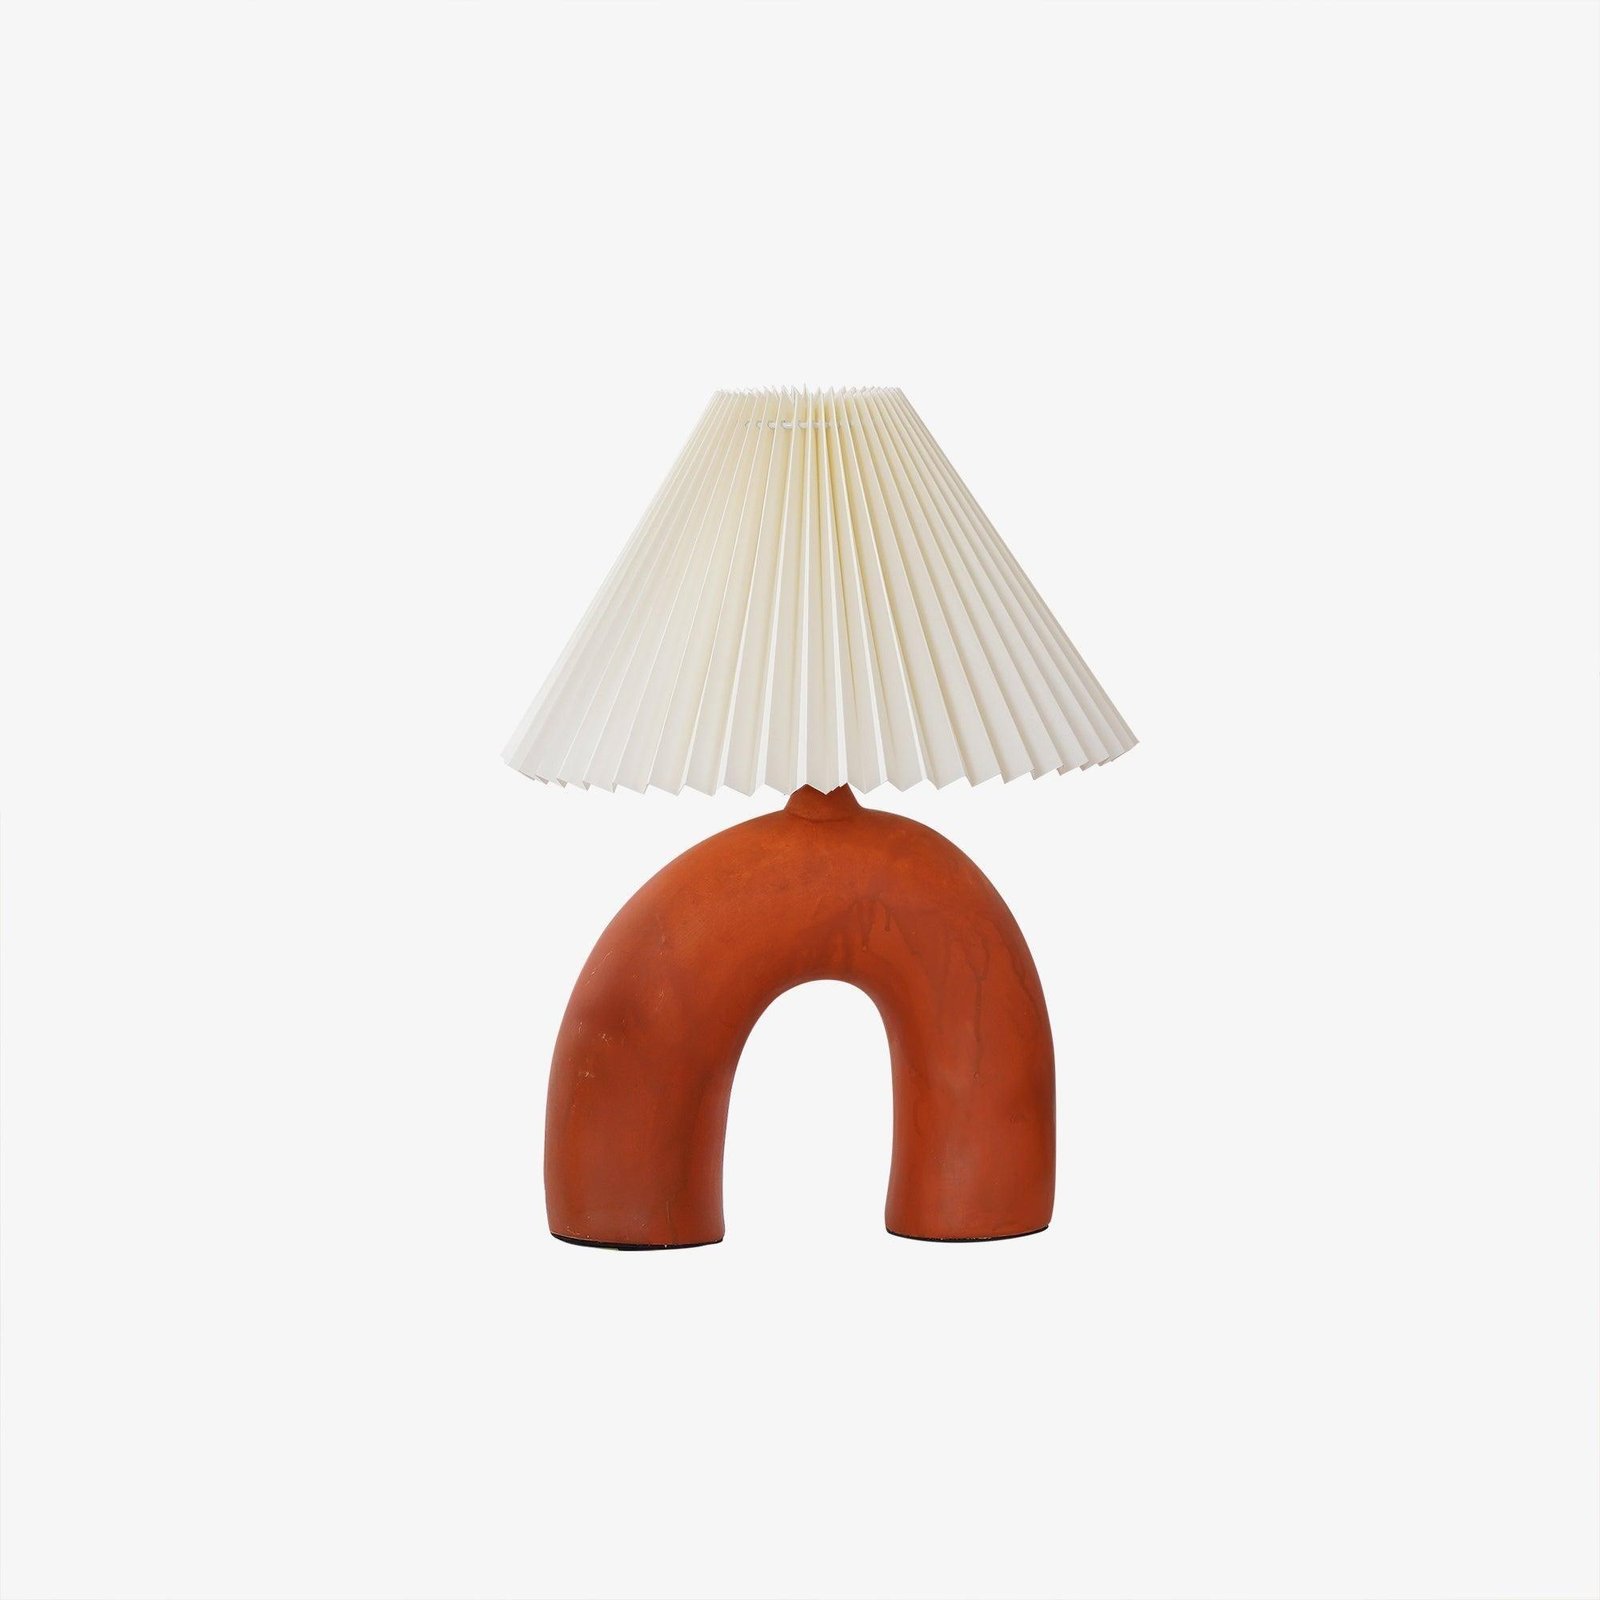 Arched Pleated Table Lamp Made of Terra Cotta, EU Plug - Dimensions: 11.8″ Diameter x 16.5″ Height (30cm Dia x 42cm H)